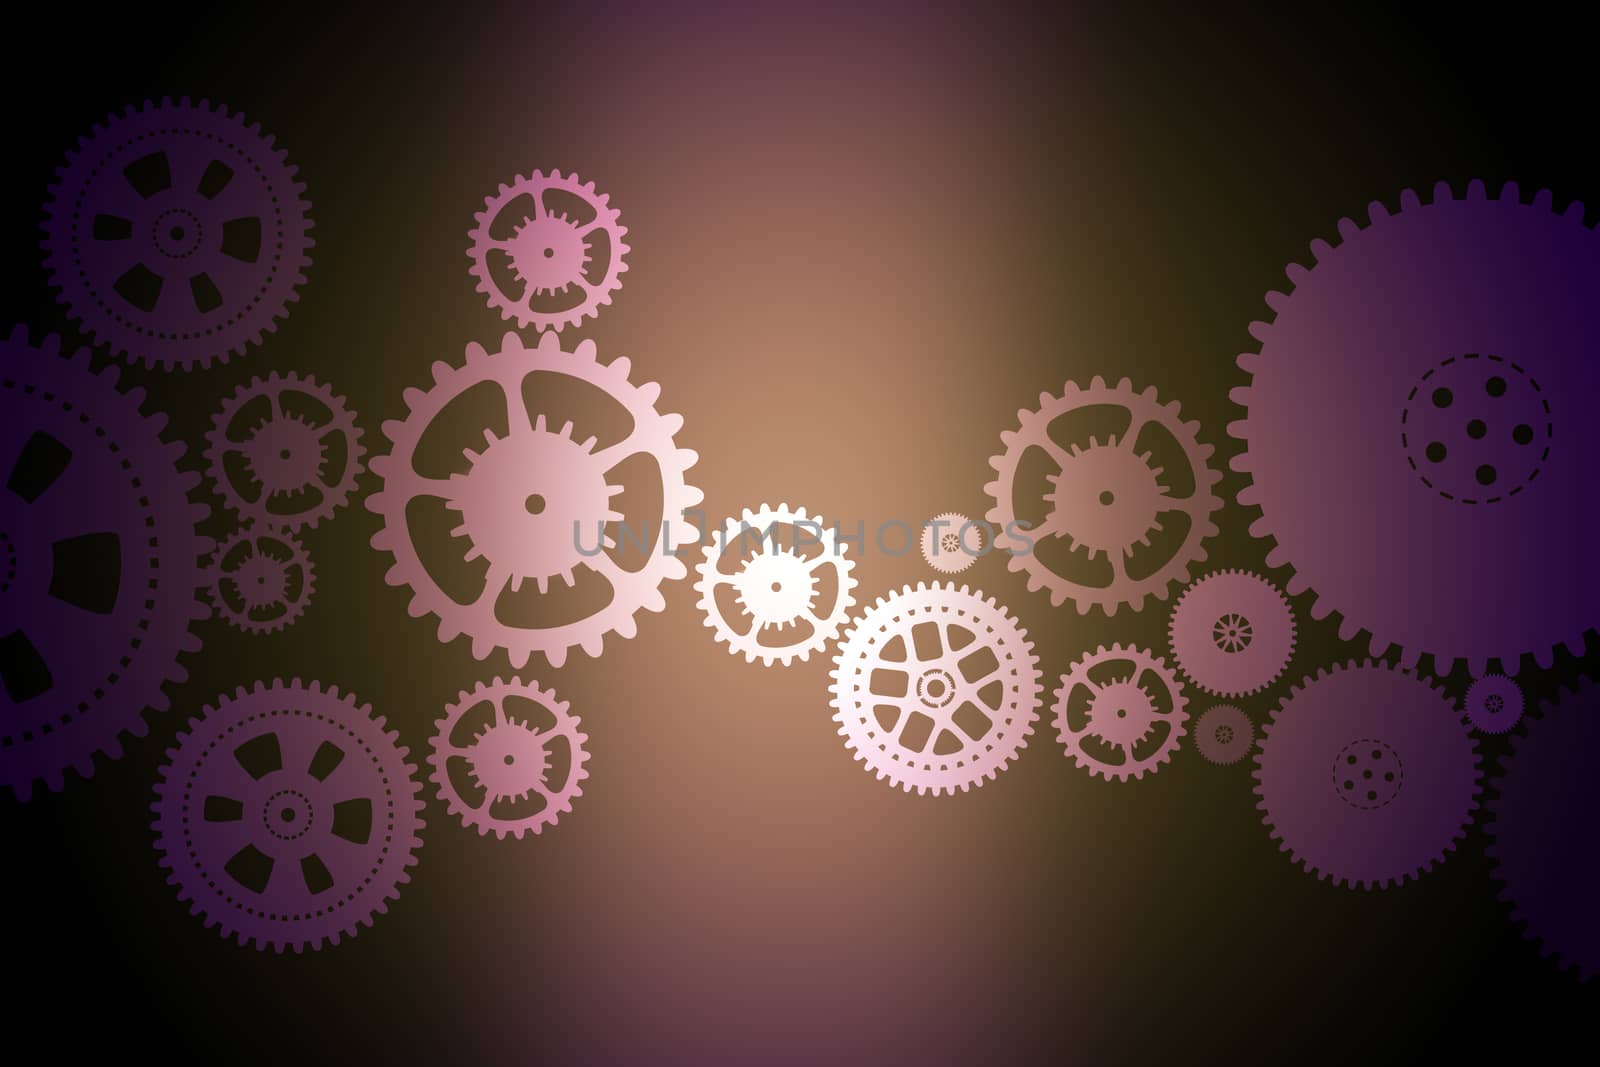 Set of mechanical gears by cherezoff